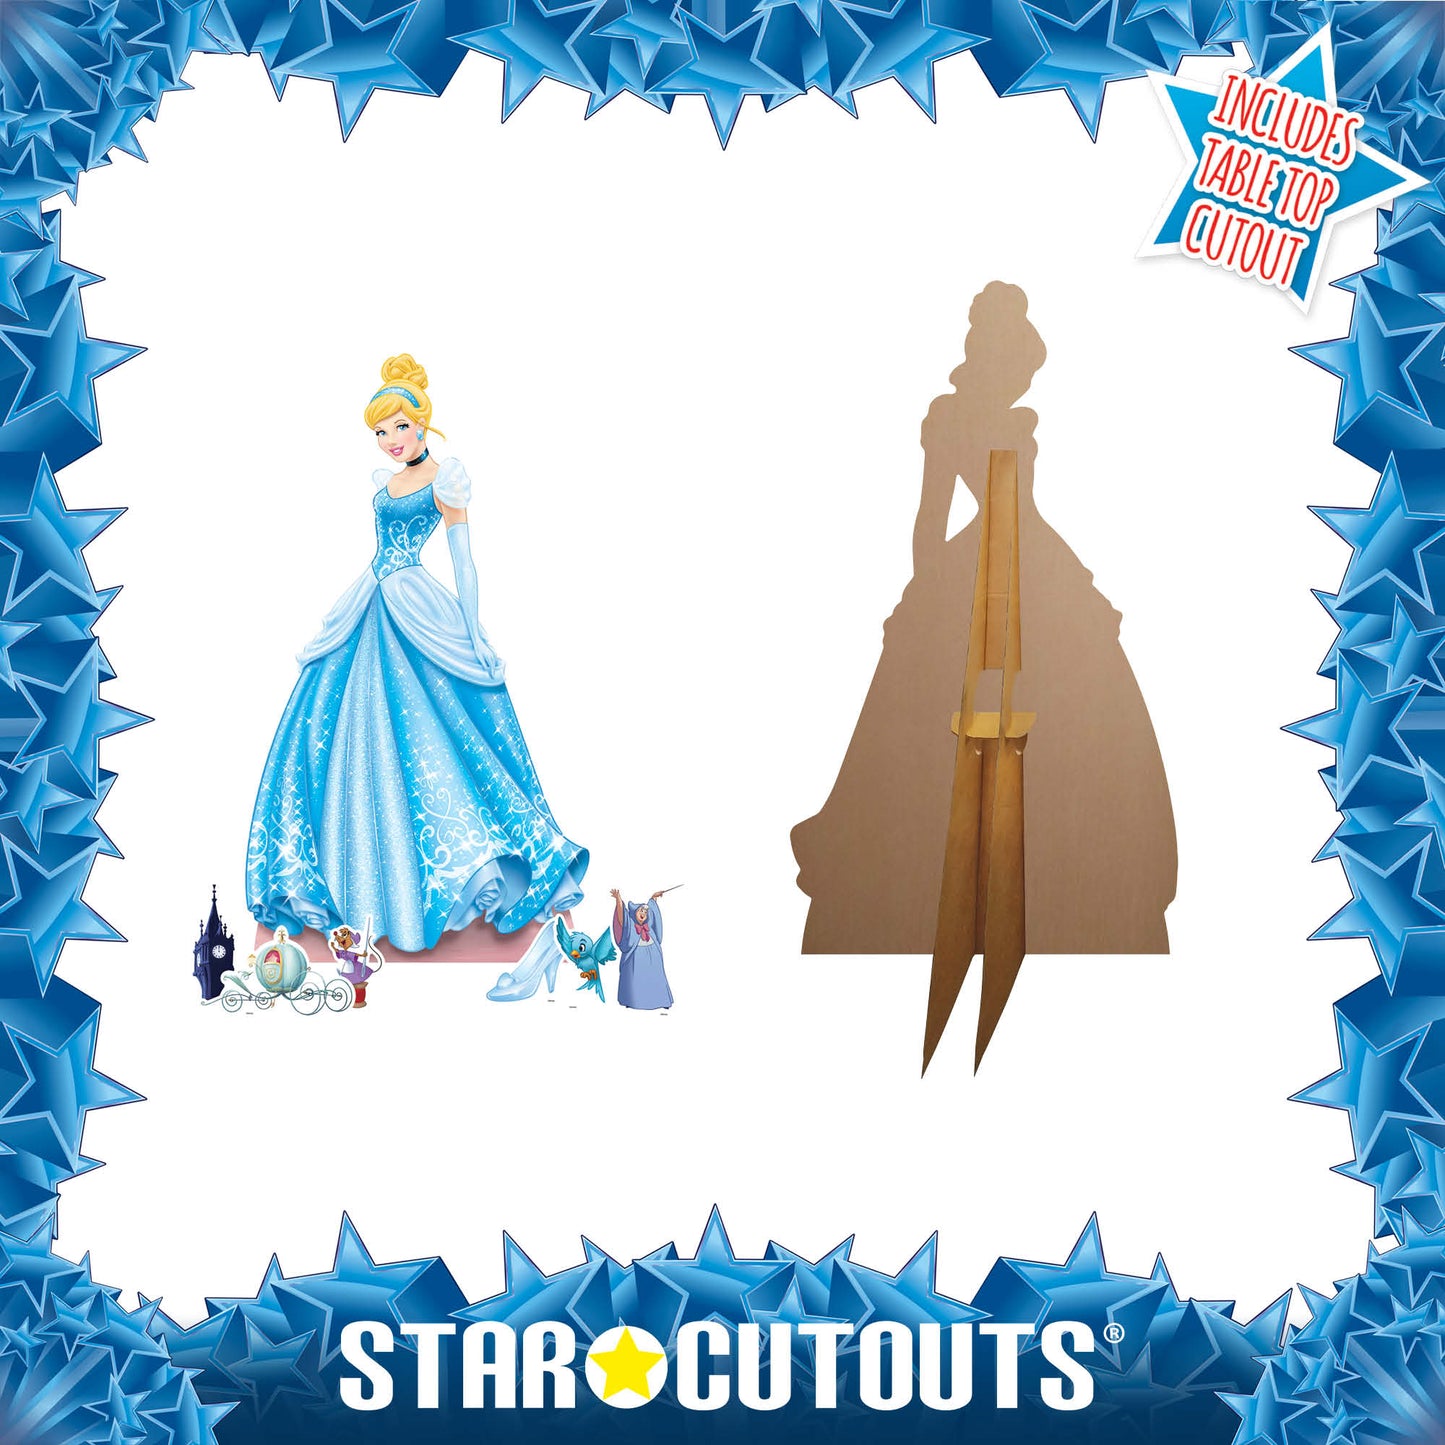 Cinderella Cardboard Cutout Party Decorations With Six Mini Party Decorations